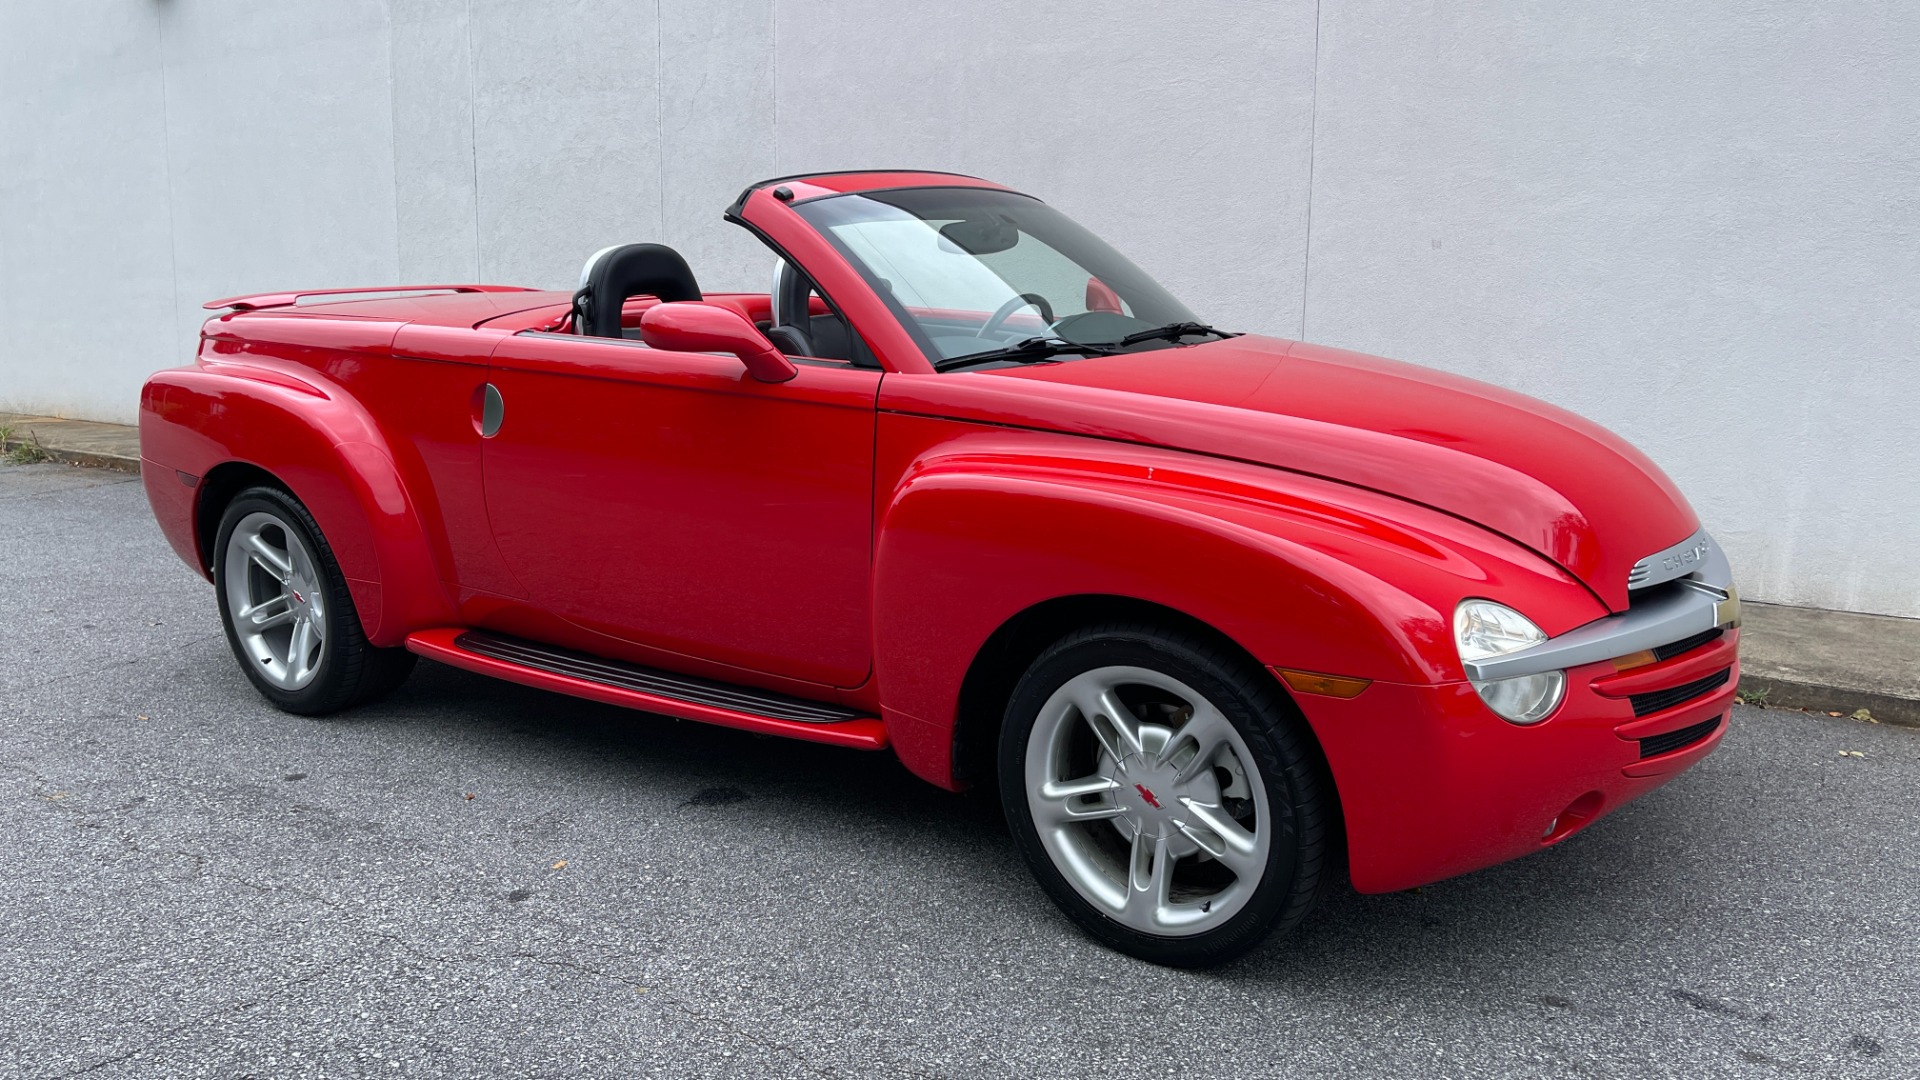 Used 2004 Chevrolet SSR LS / CONVERTIBLE / 5.3L V8 / LEATHER / HEATED SEATS / BACKUP CAMERA for sale $19,995 at Formula Imports in Charlotte NC 28227 7